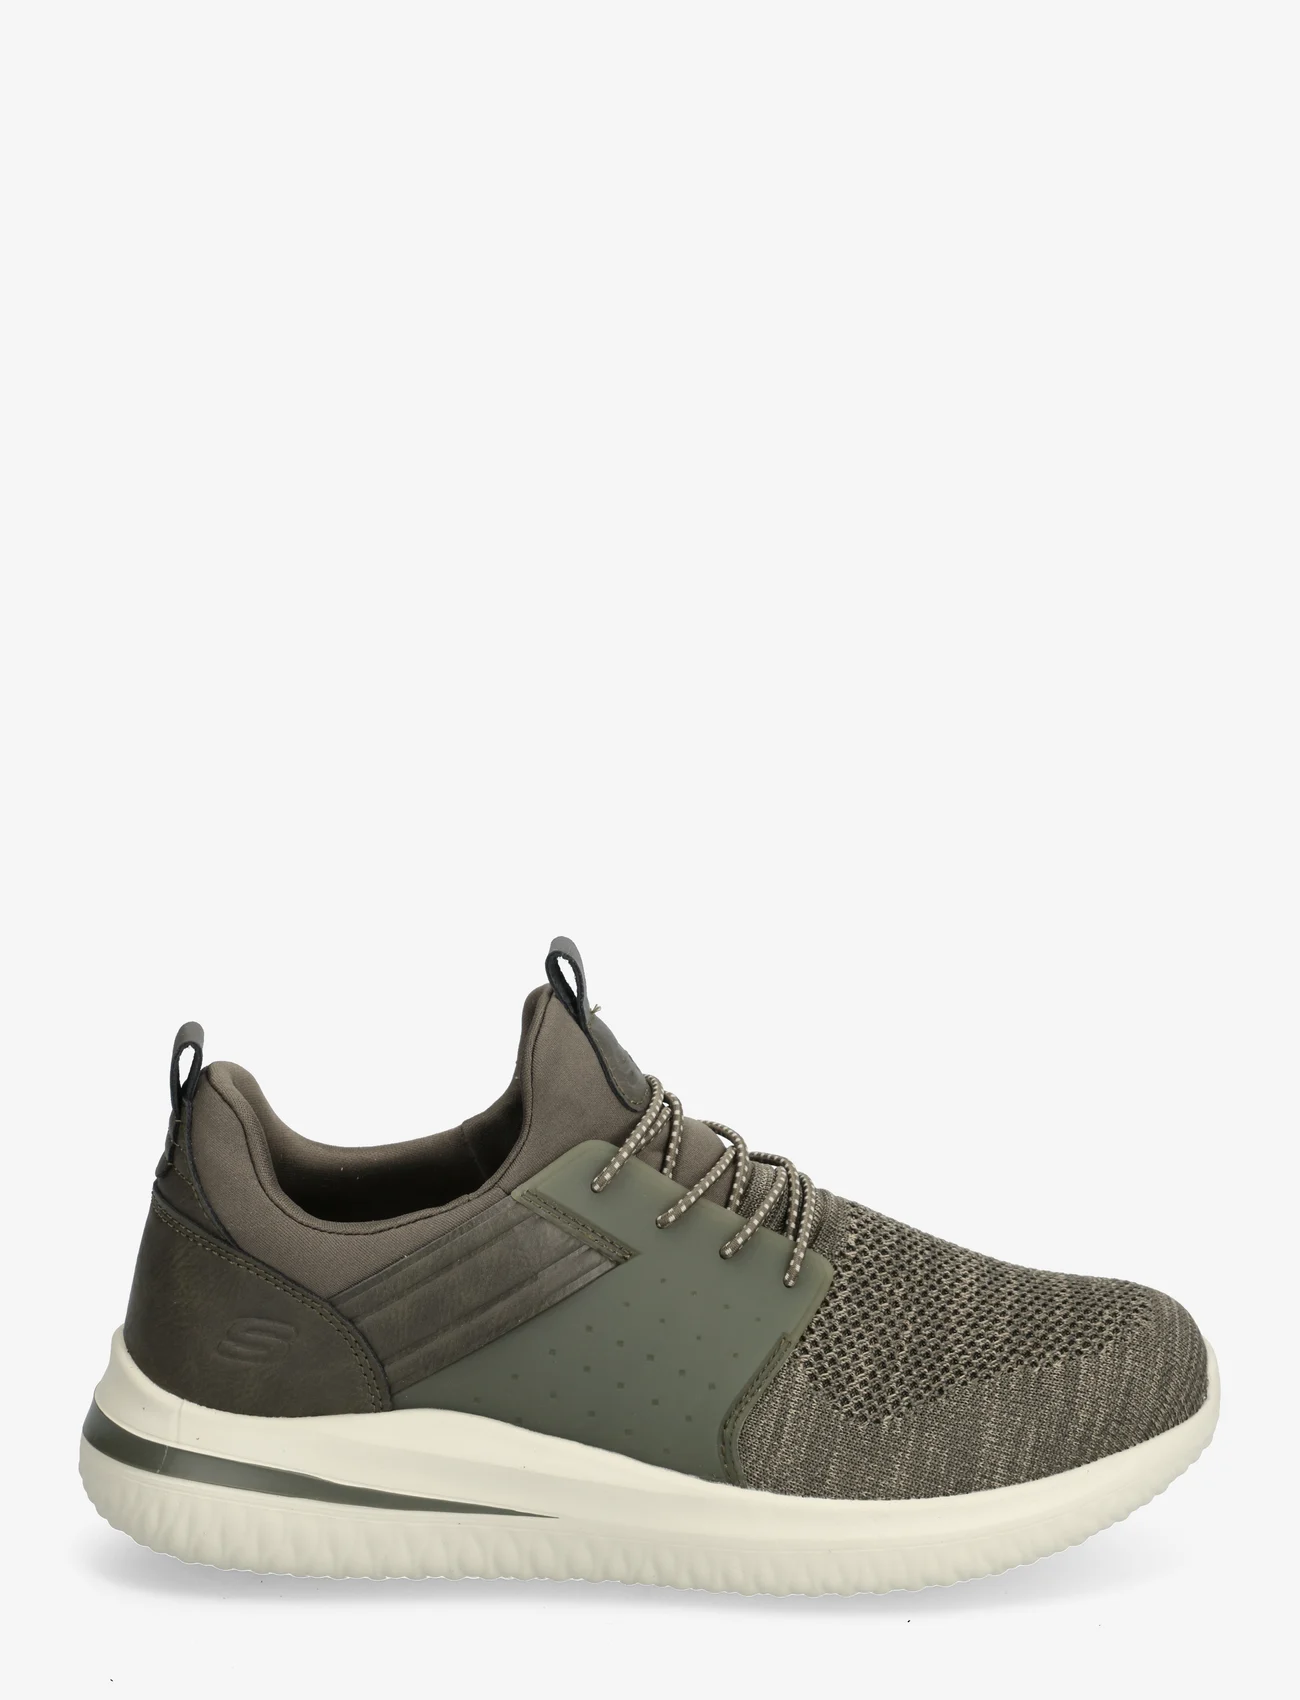 Skechers - Mens Delson 3.0 - Cicada - lave sneakers - olv olive - 1